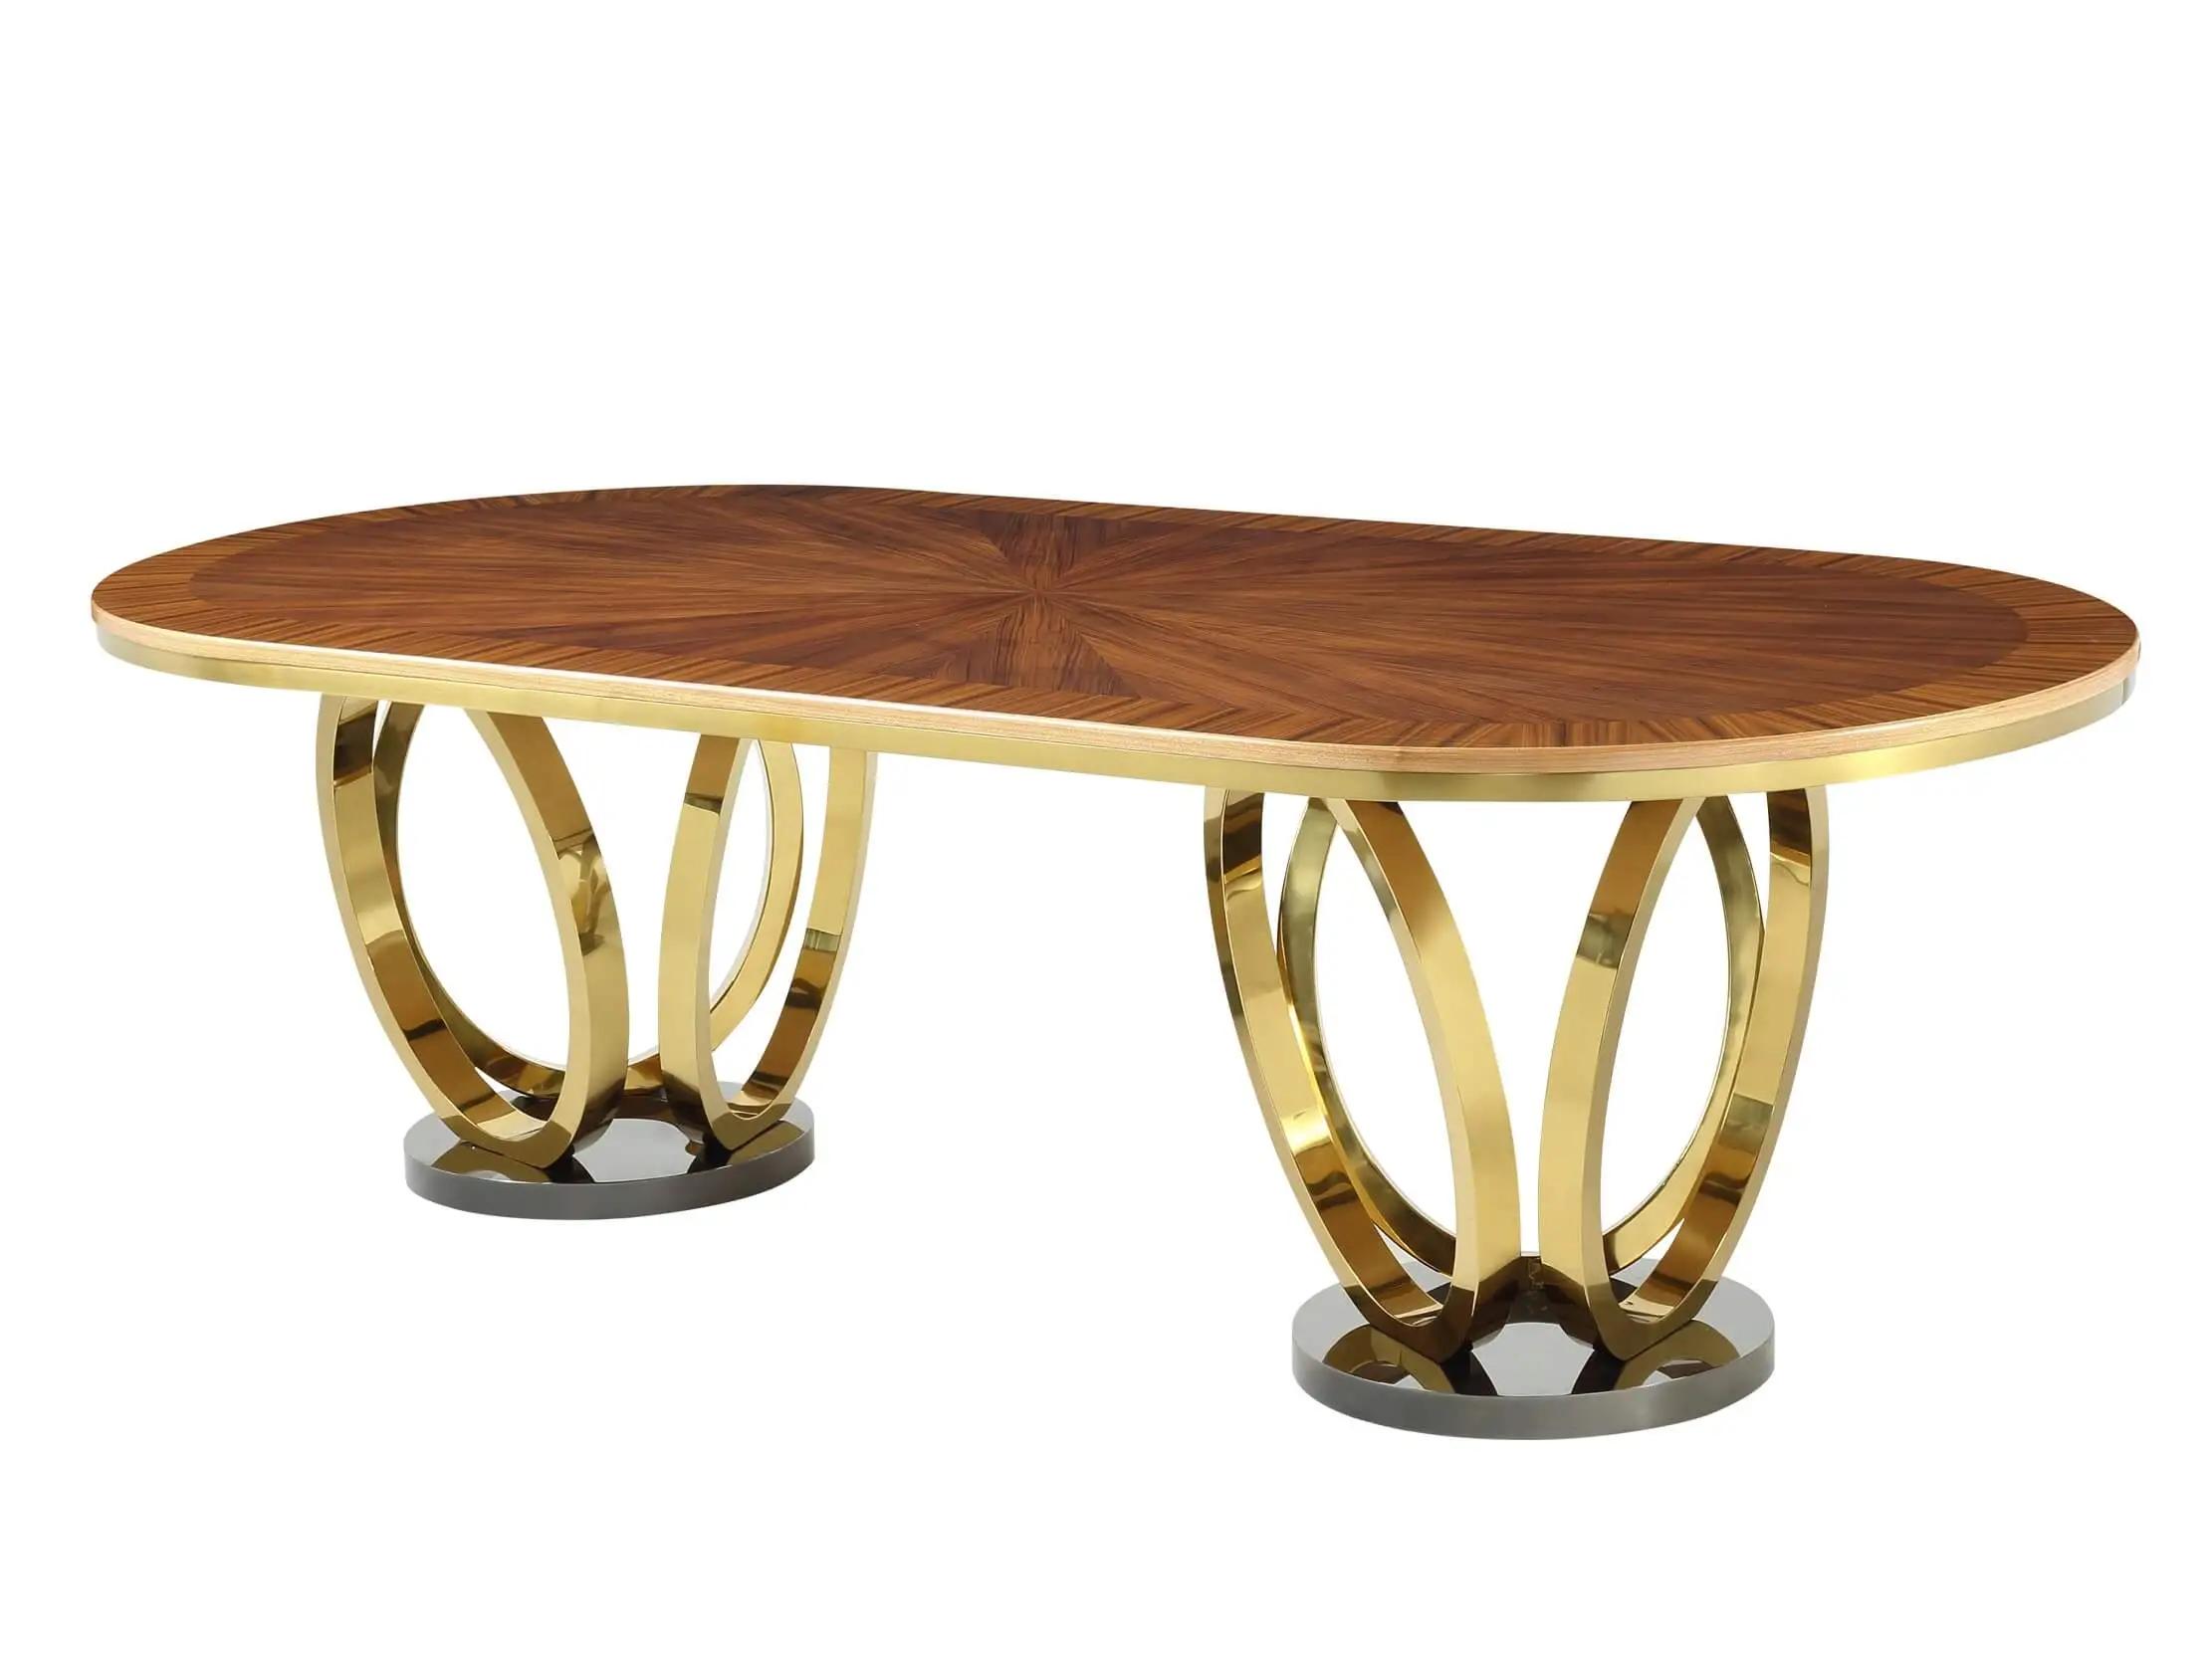 Modern Oval Table Galaxy EF-54425-DT in Gold, Chocolate 